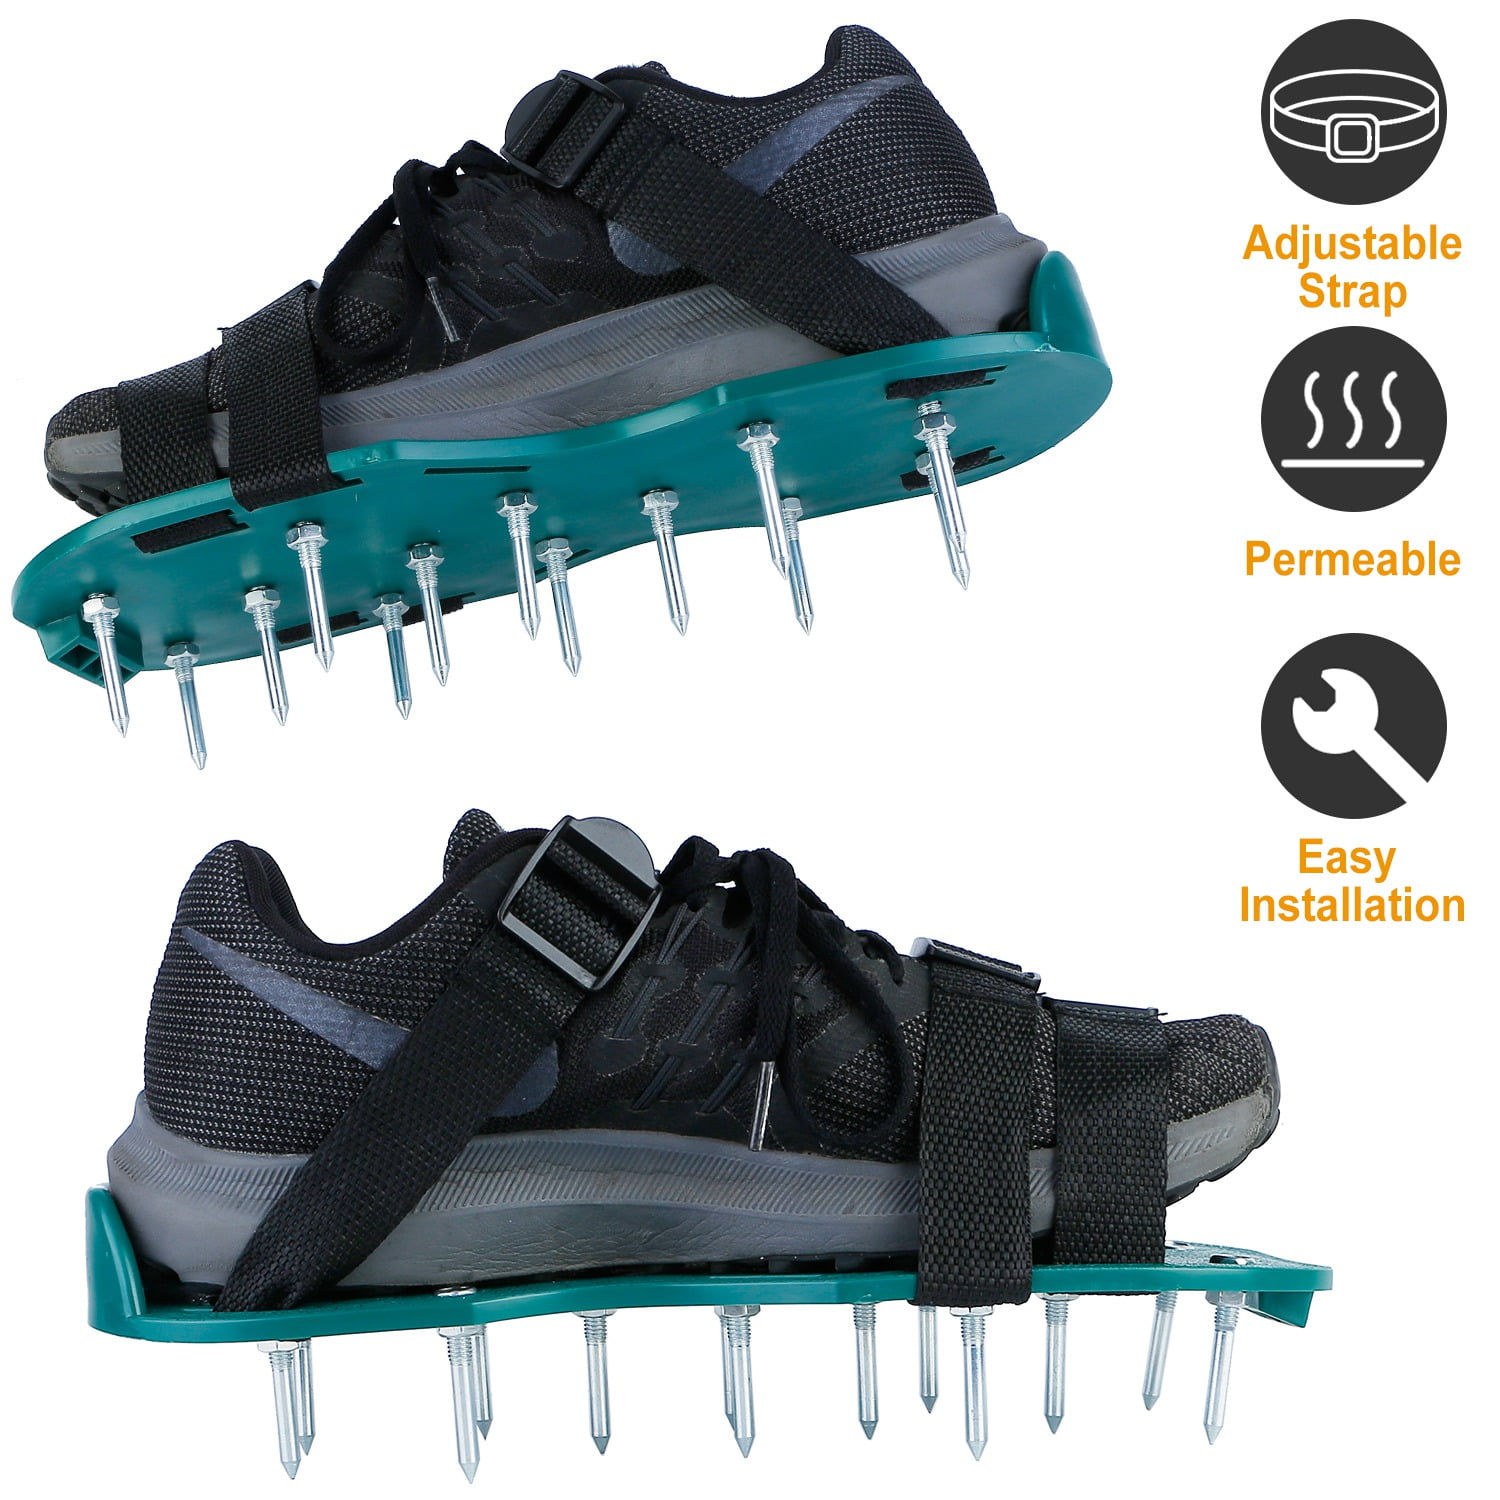 Lawn Aerator Shoes Sandals Plastic Grass Aerating Spikes Tool A4E4 Sod Yard D8A9 